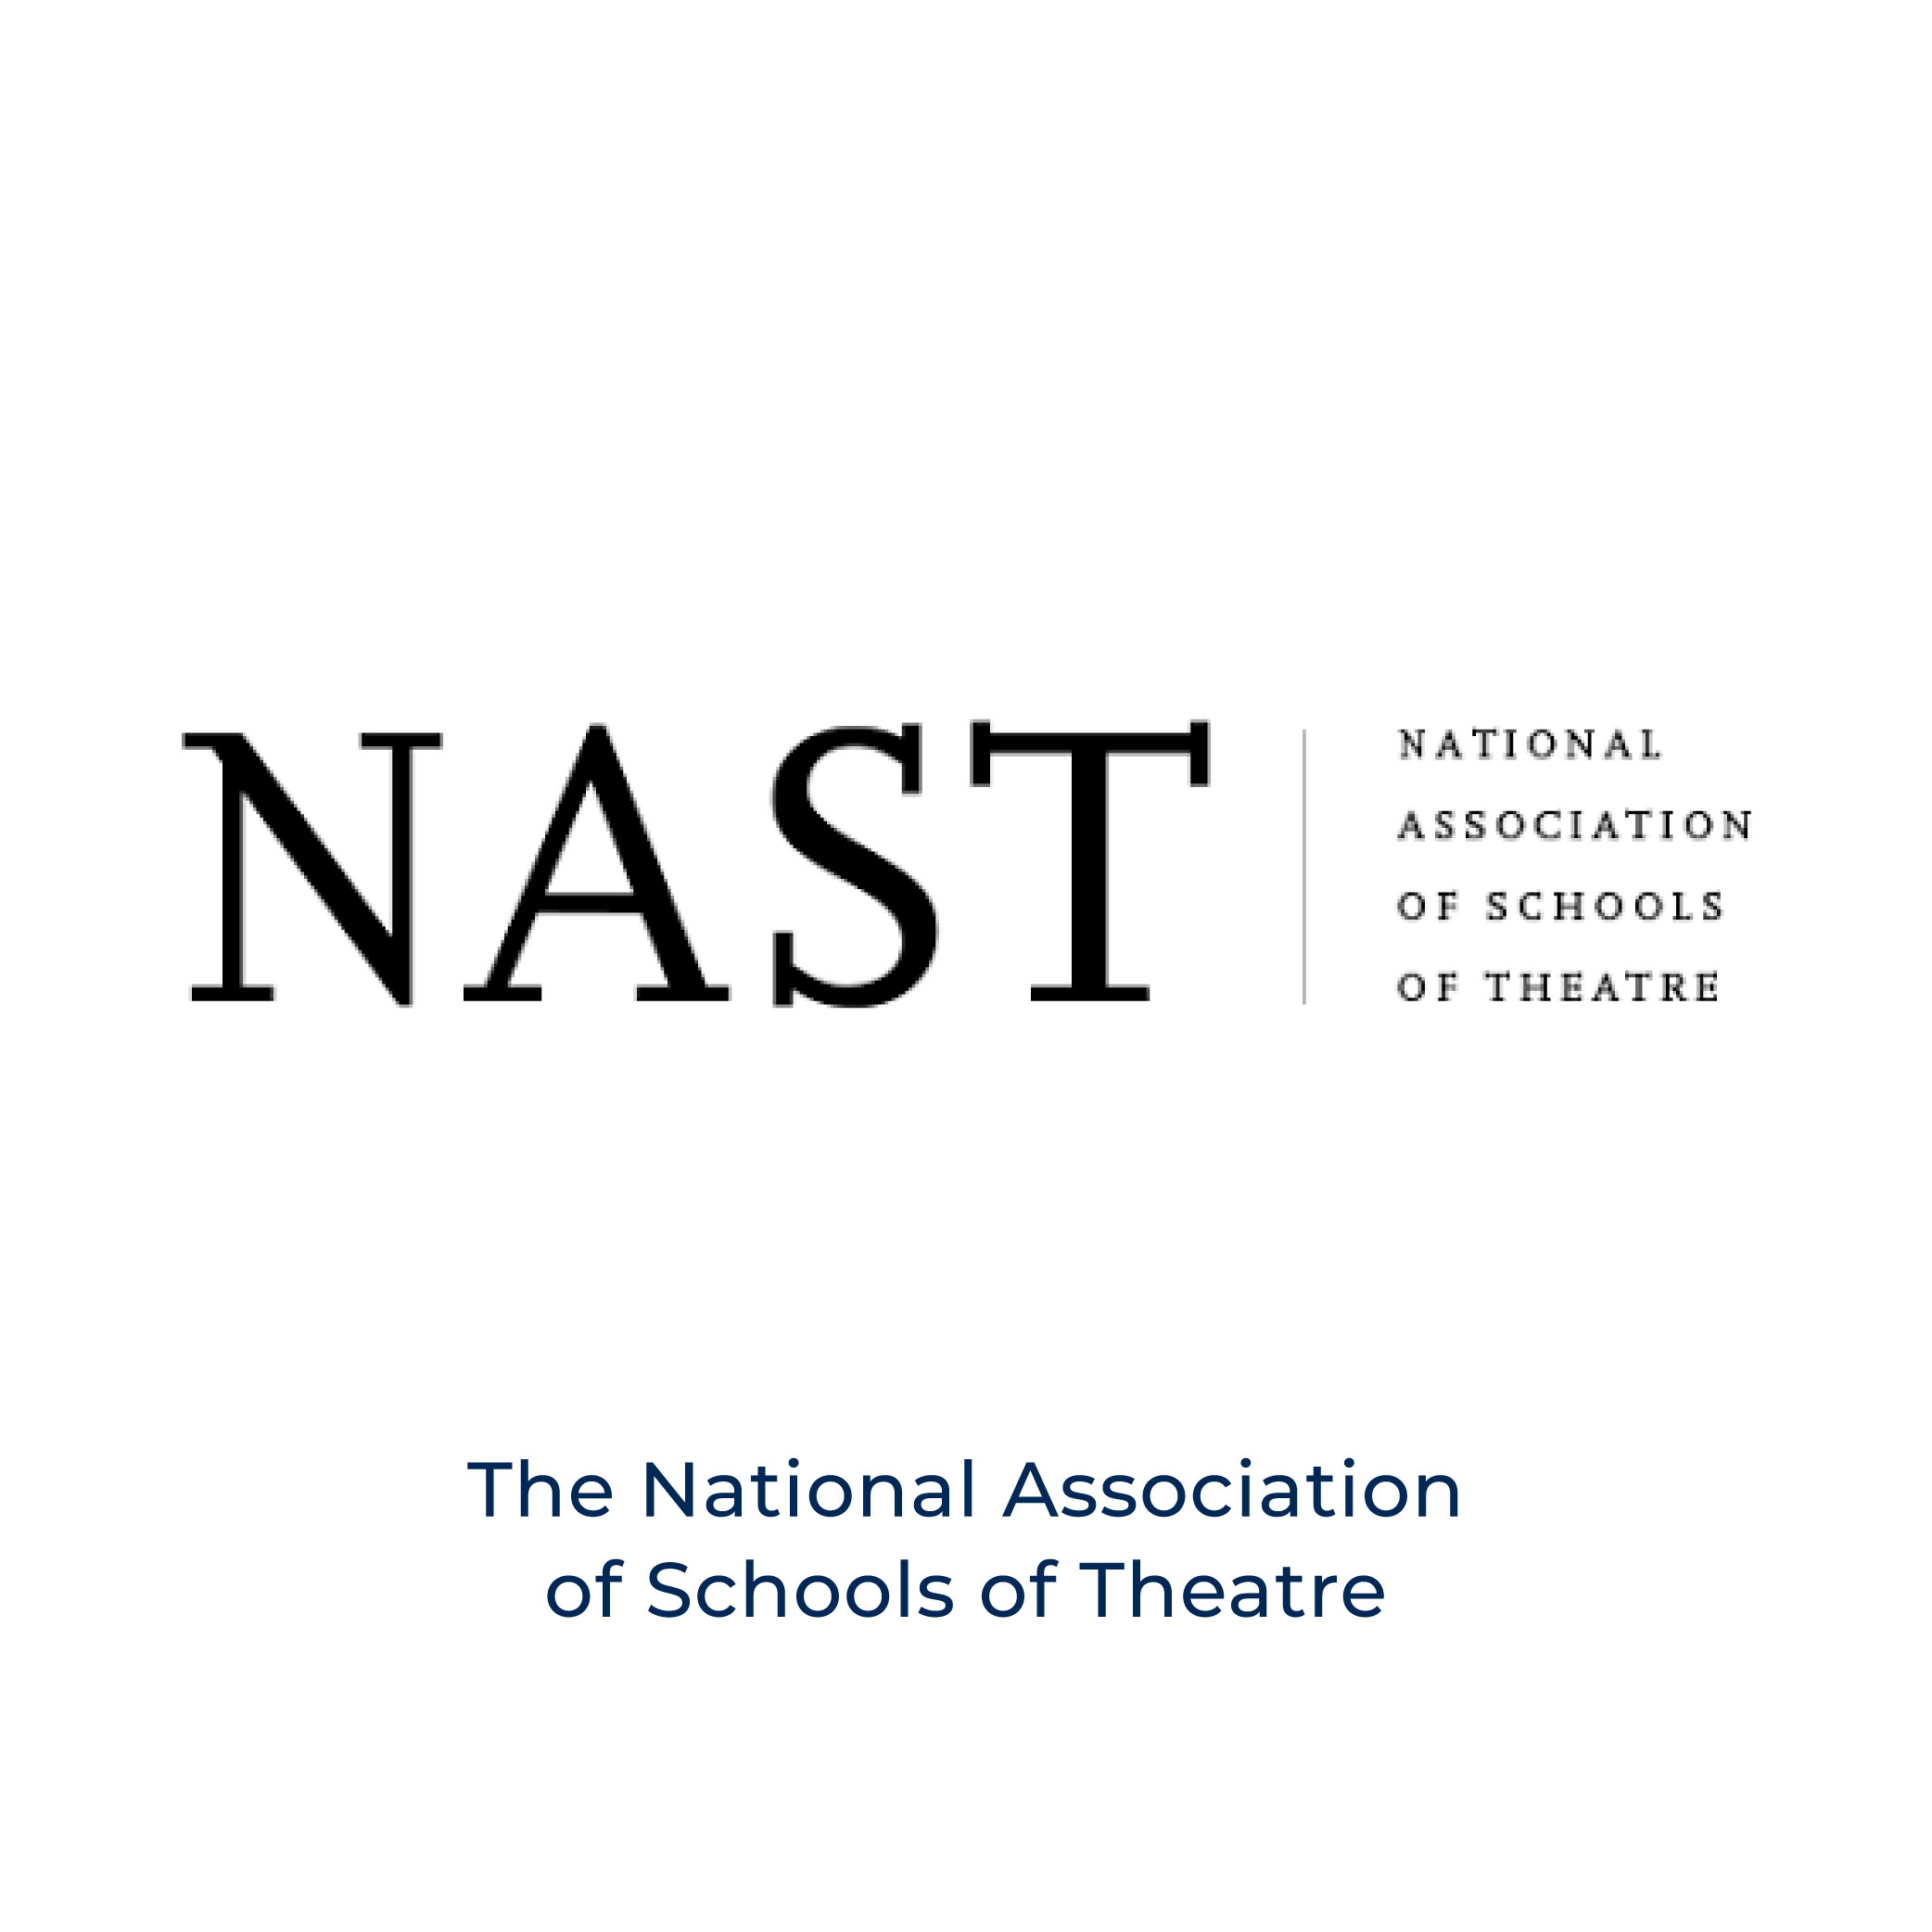 The National Association of Schools of Theatre